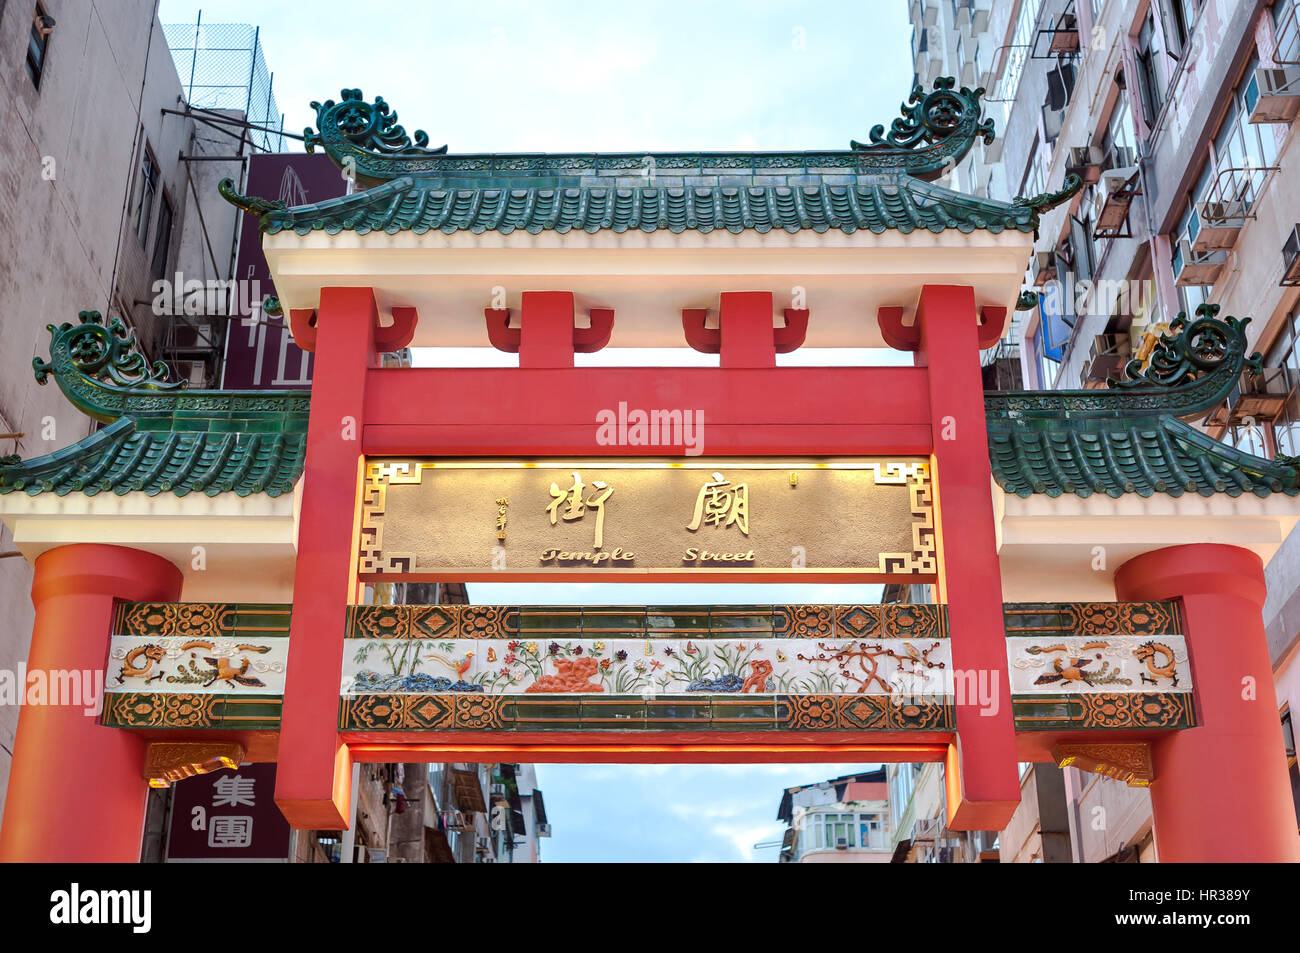 KOWLOON, HONG KONG - JAN 10, 2014 - Traditional Chinese arch at the entrance to Temple Street in the Jordan district of Kowloon, Hong Kong Stock Photo